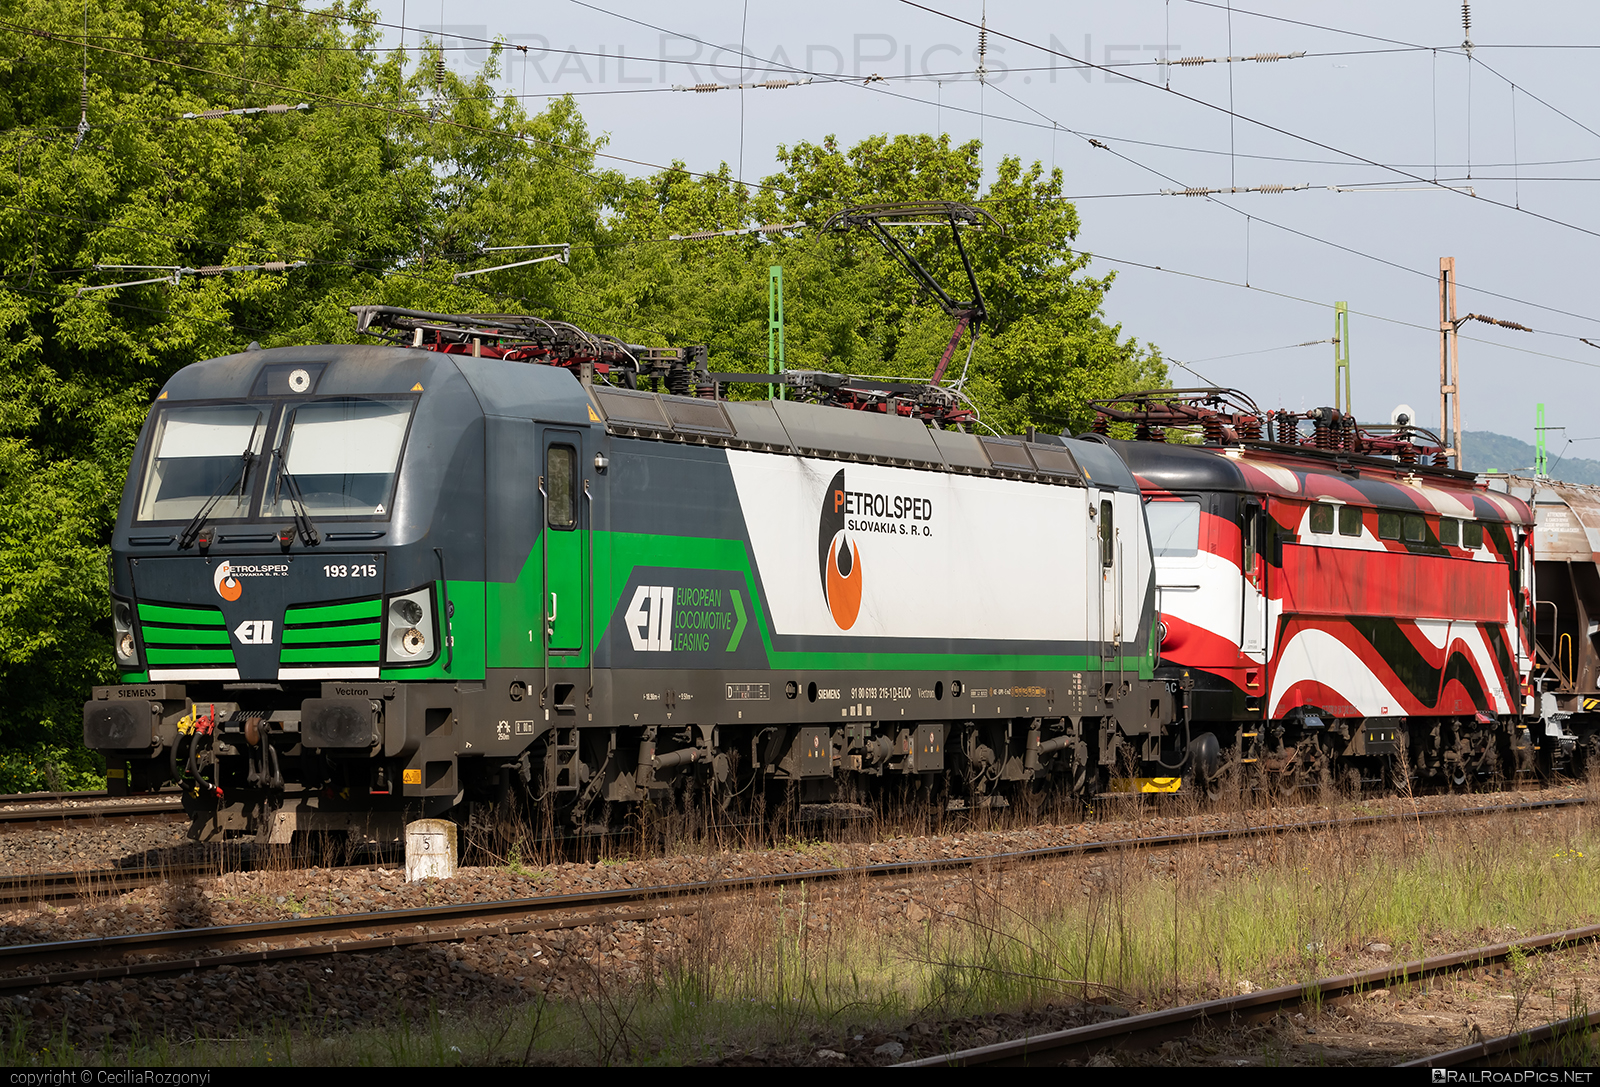 Siemens Vectron MS - 193 215 operated by PETROLSPED Slovakia s.r.o. #ell #ellgermany #eloc #europeanlocomotiveleasing #petrolsped #petrolspedSlovakia #petrolspedSlovakiaSro #railLog #railLogSro #siemens #siemensVectron #siemensVectronMS #vectron #vectronMS